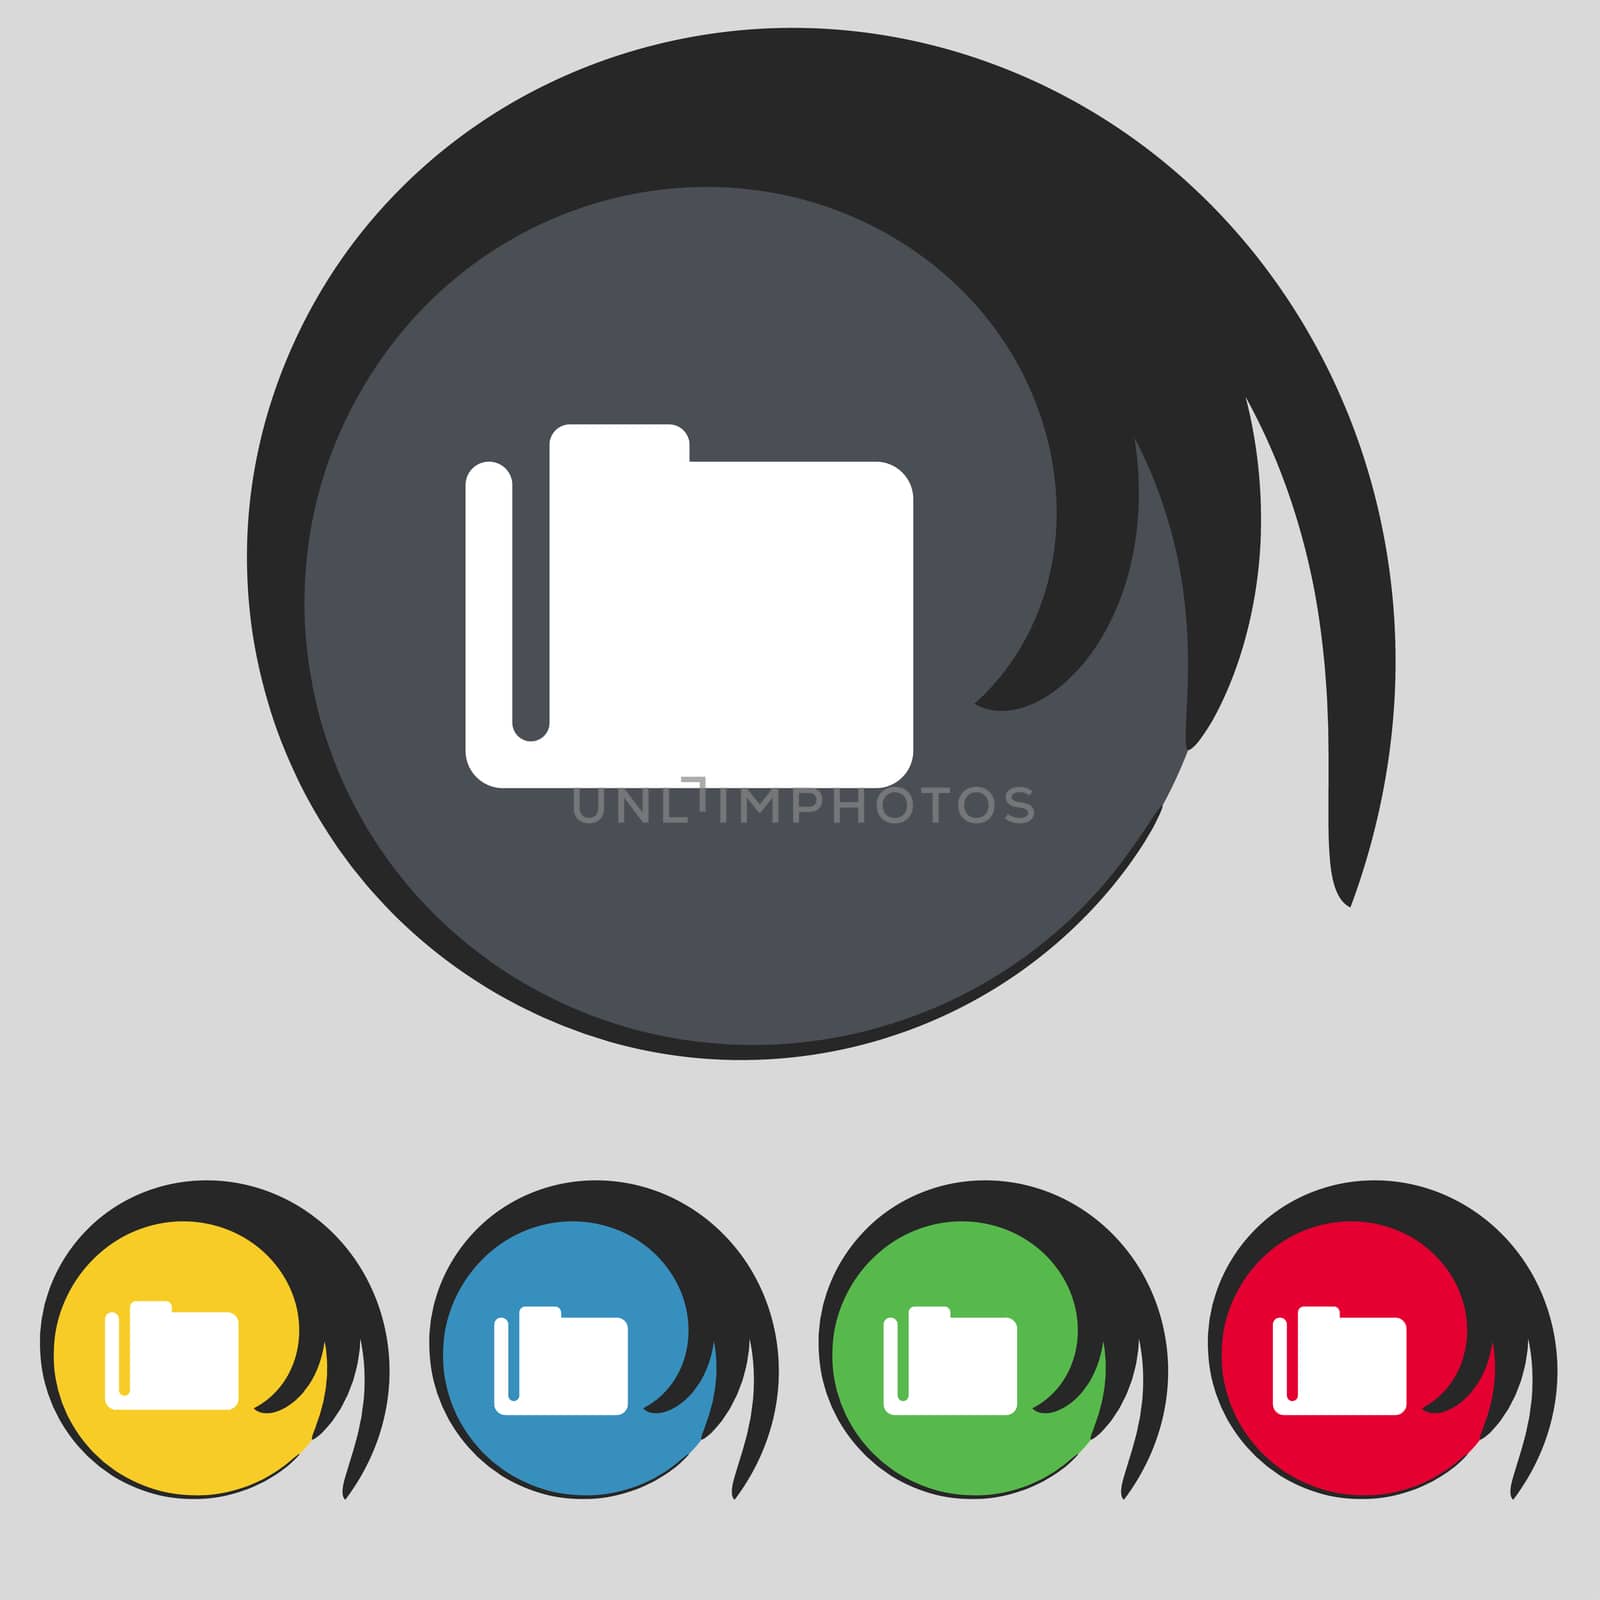 Document folder icon sign. Symbol on five colored buttons. illustration